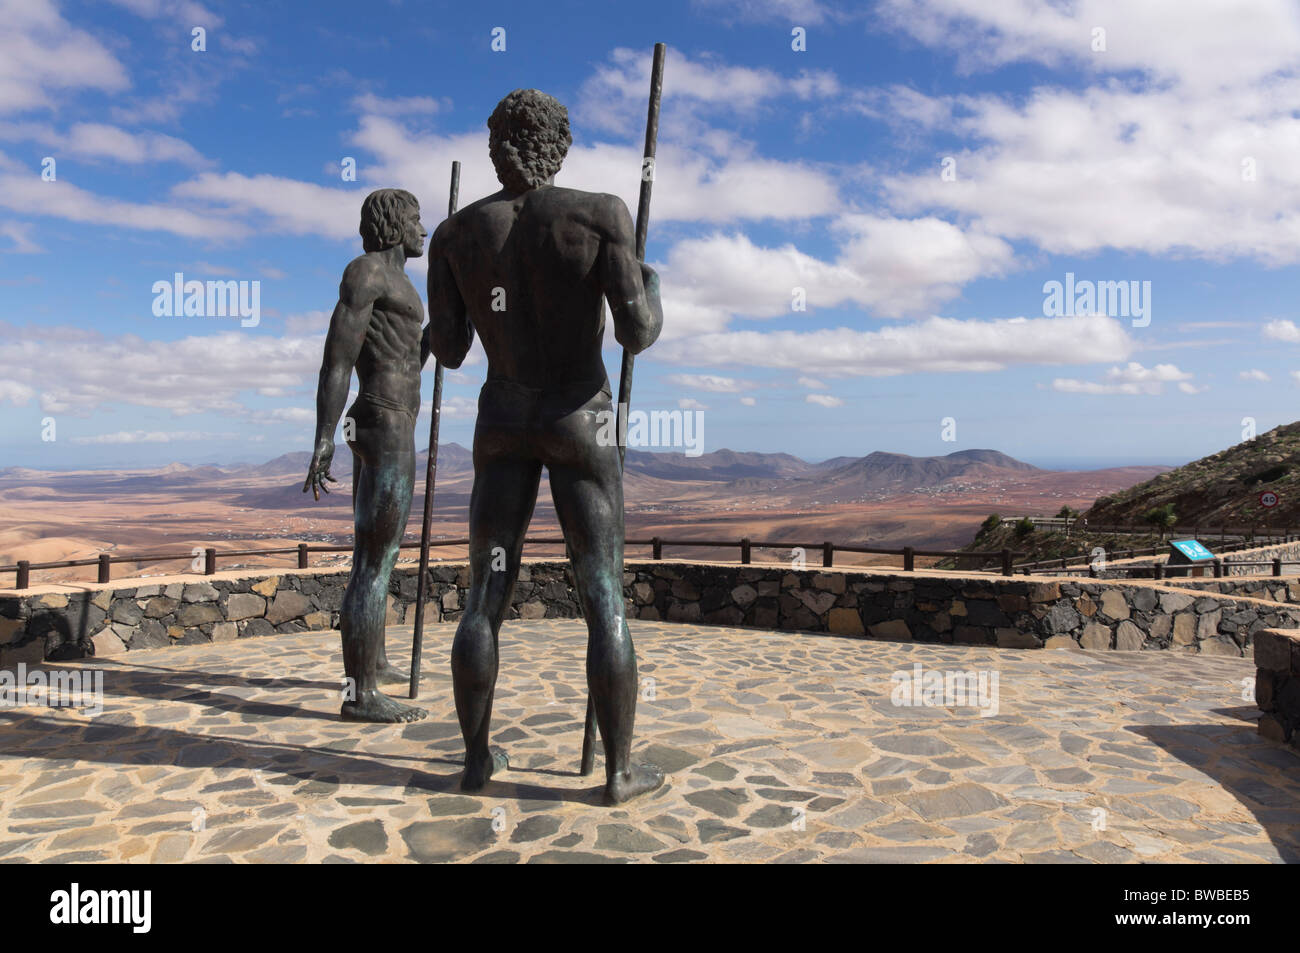 Fuerteventura, Canary Islands - statues of Guise and Ayose, preconquest kings of Erbania Stock Photo